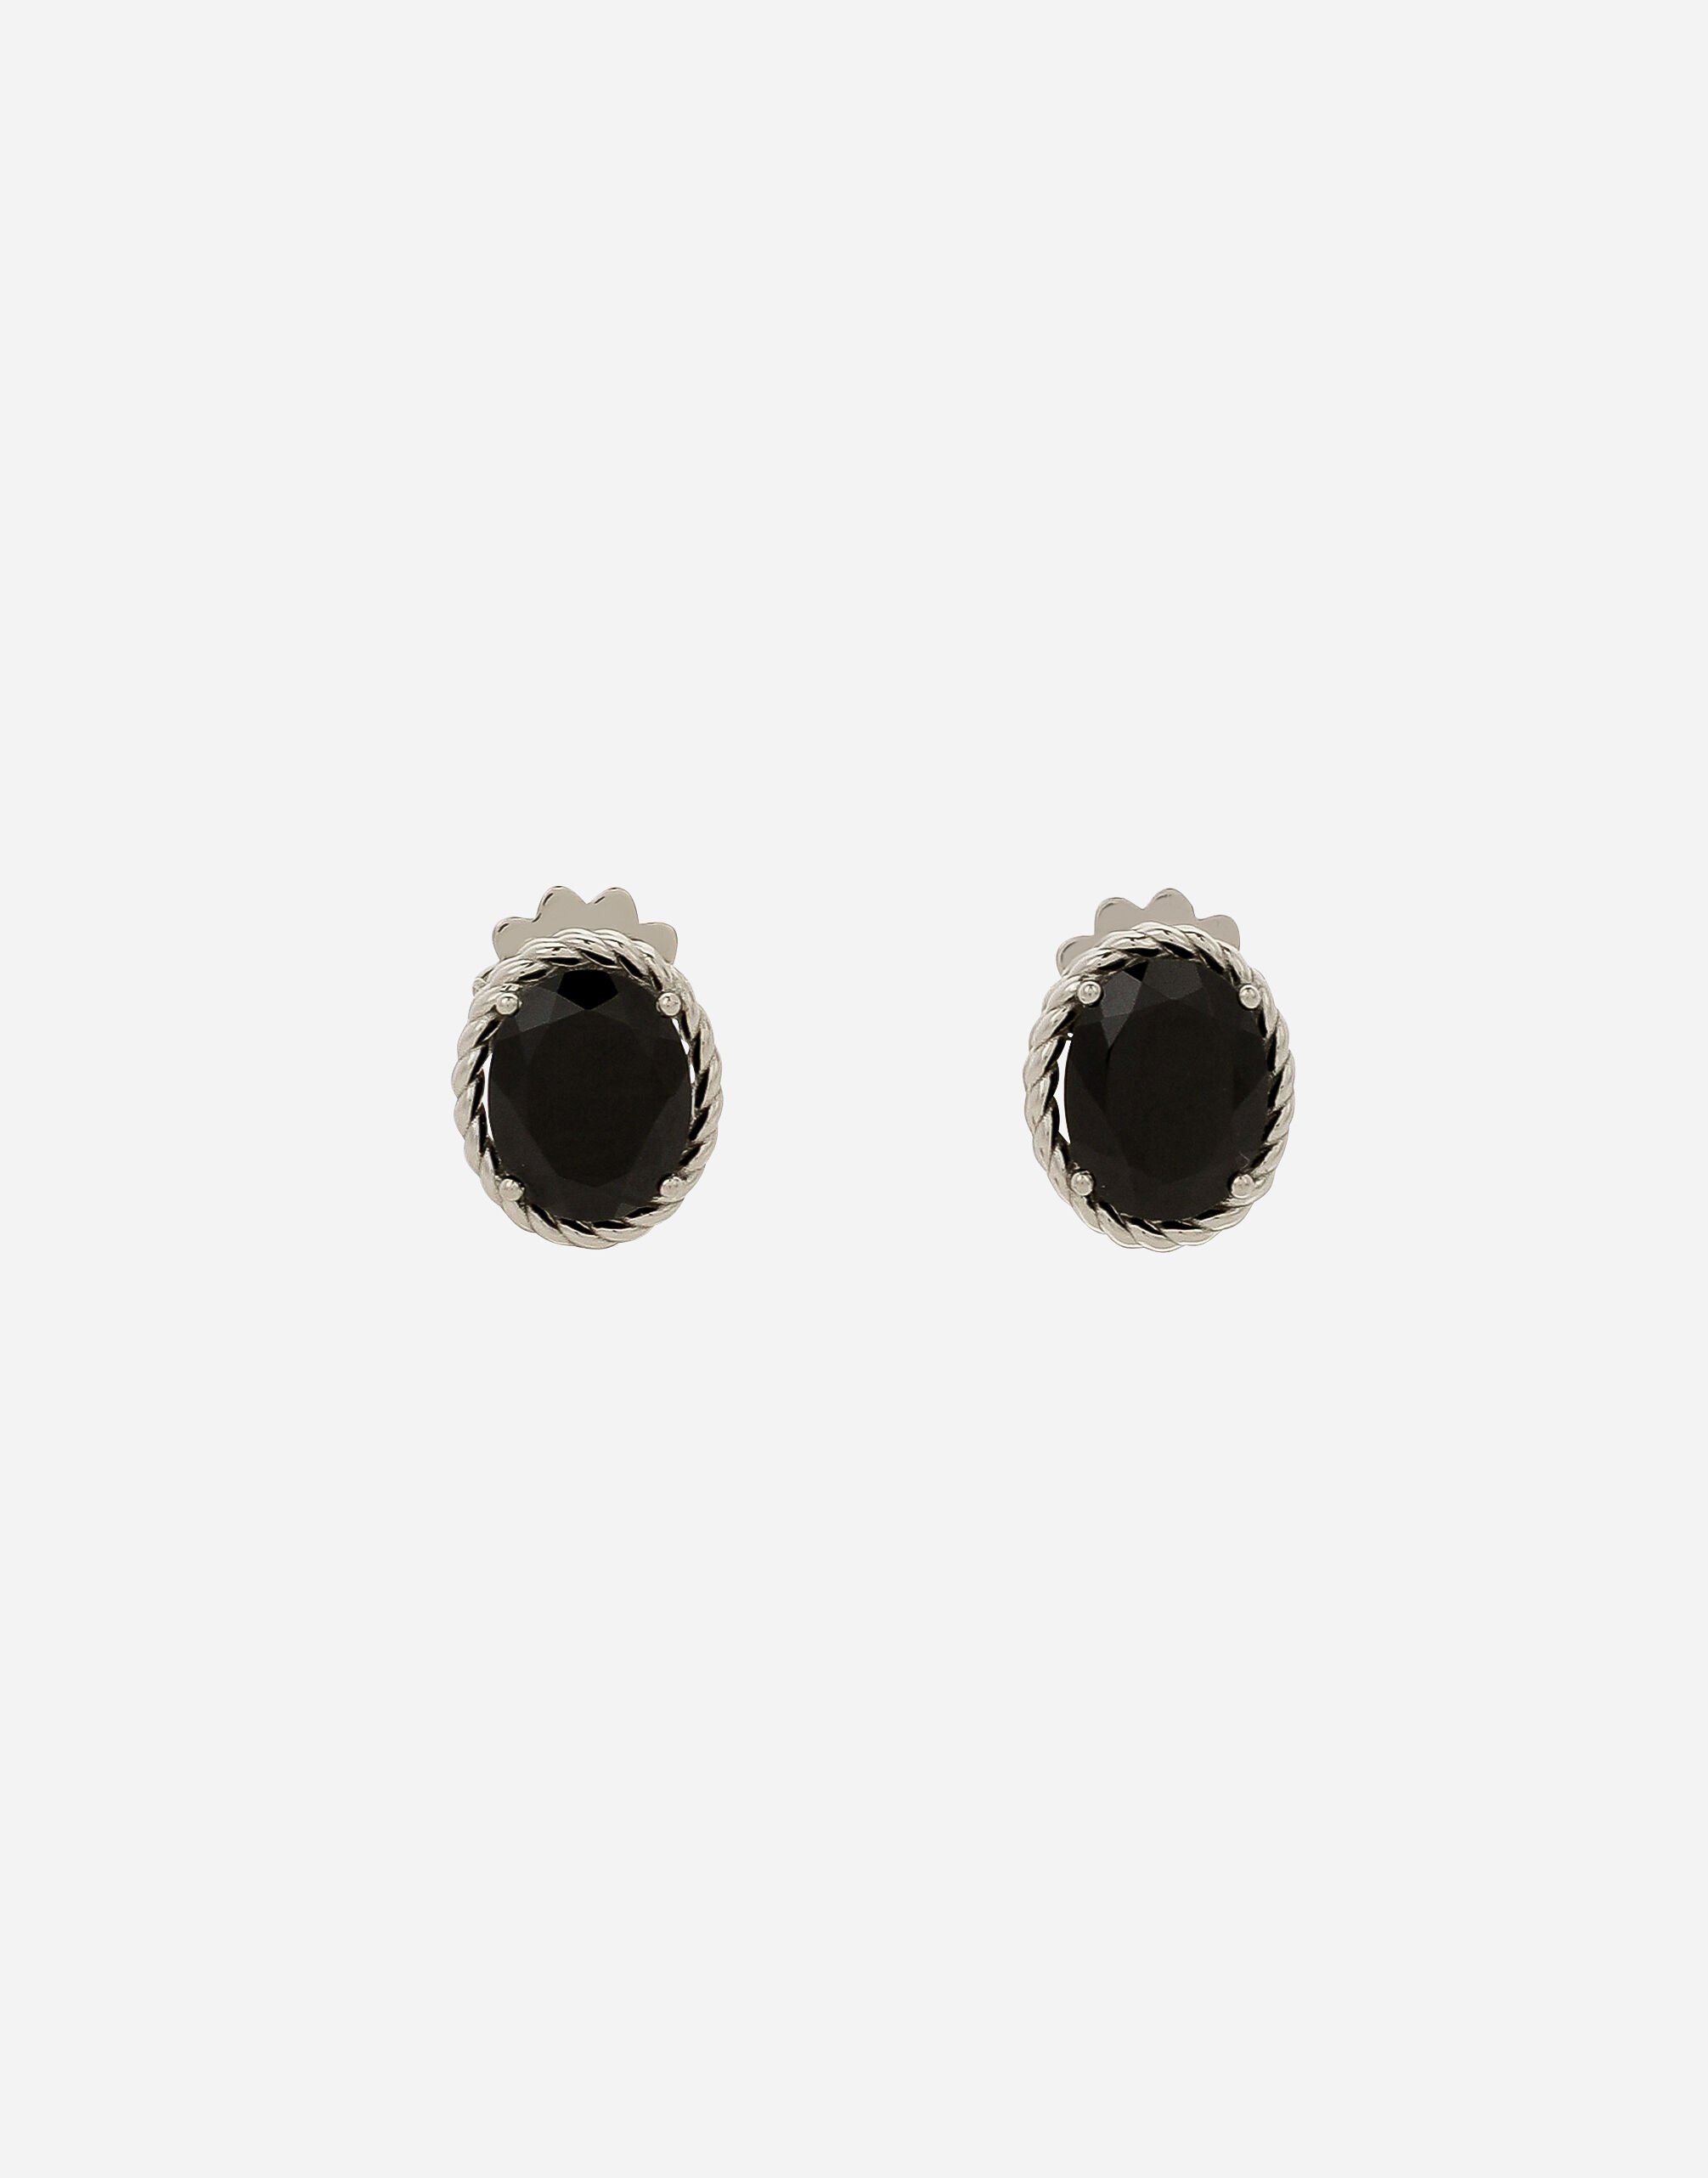 ${brand} Anna earrings in white gold 18Kt and black spinels ${colorDescription} ${masterID}